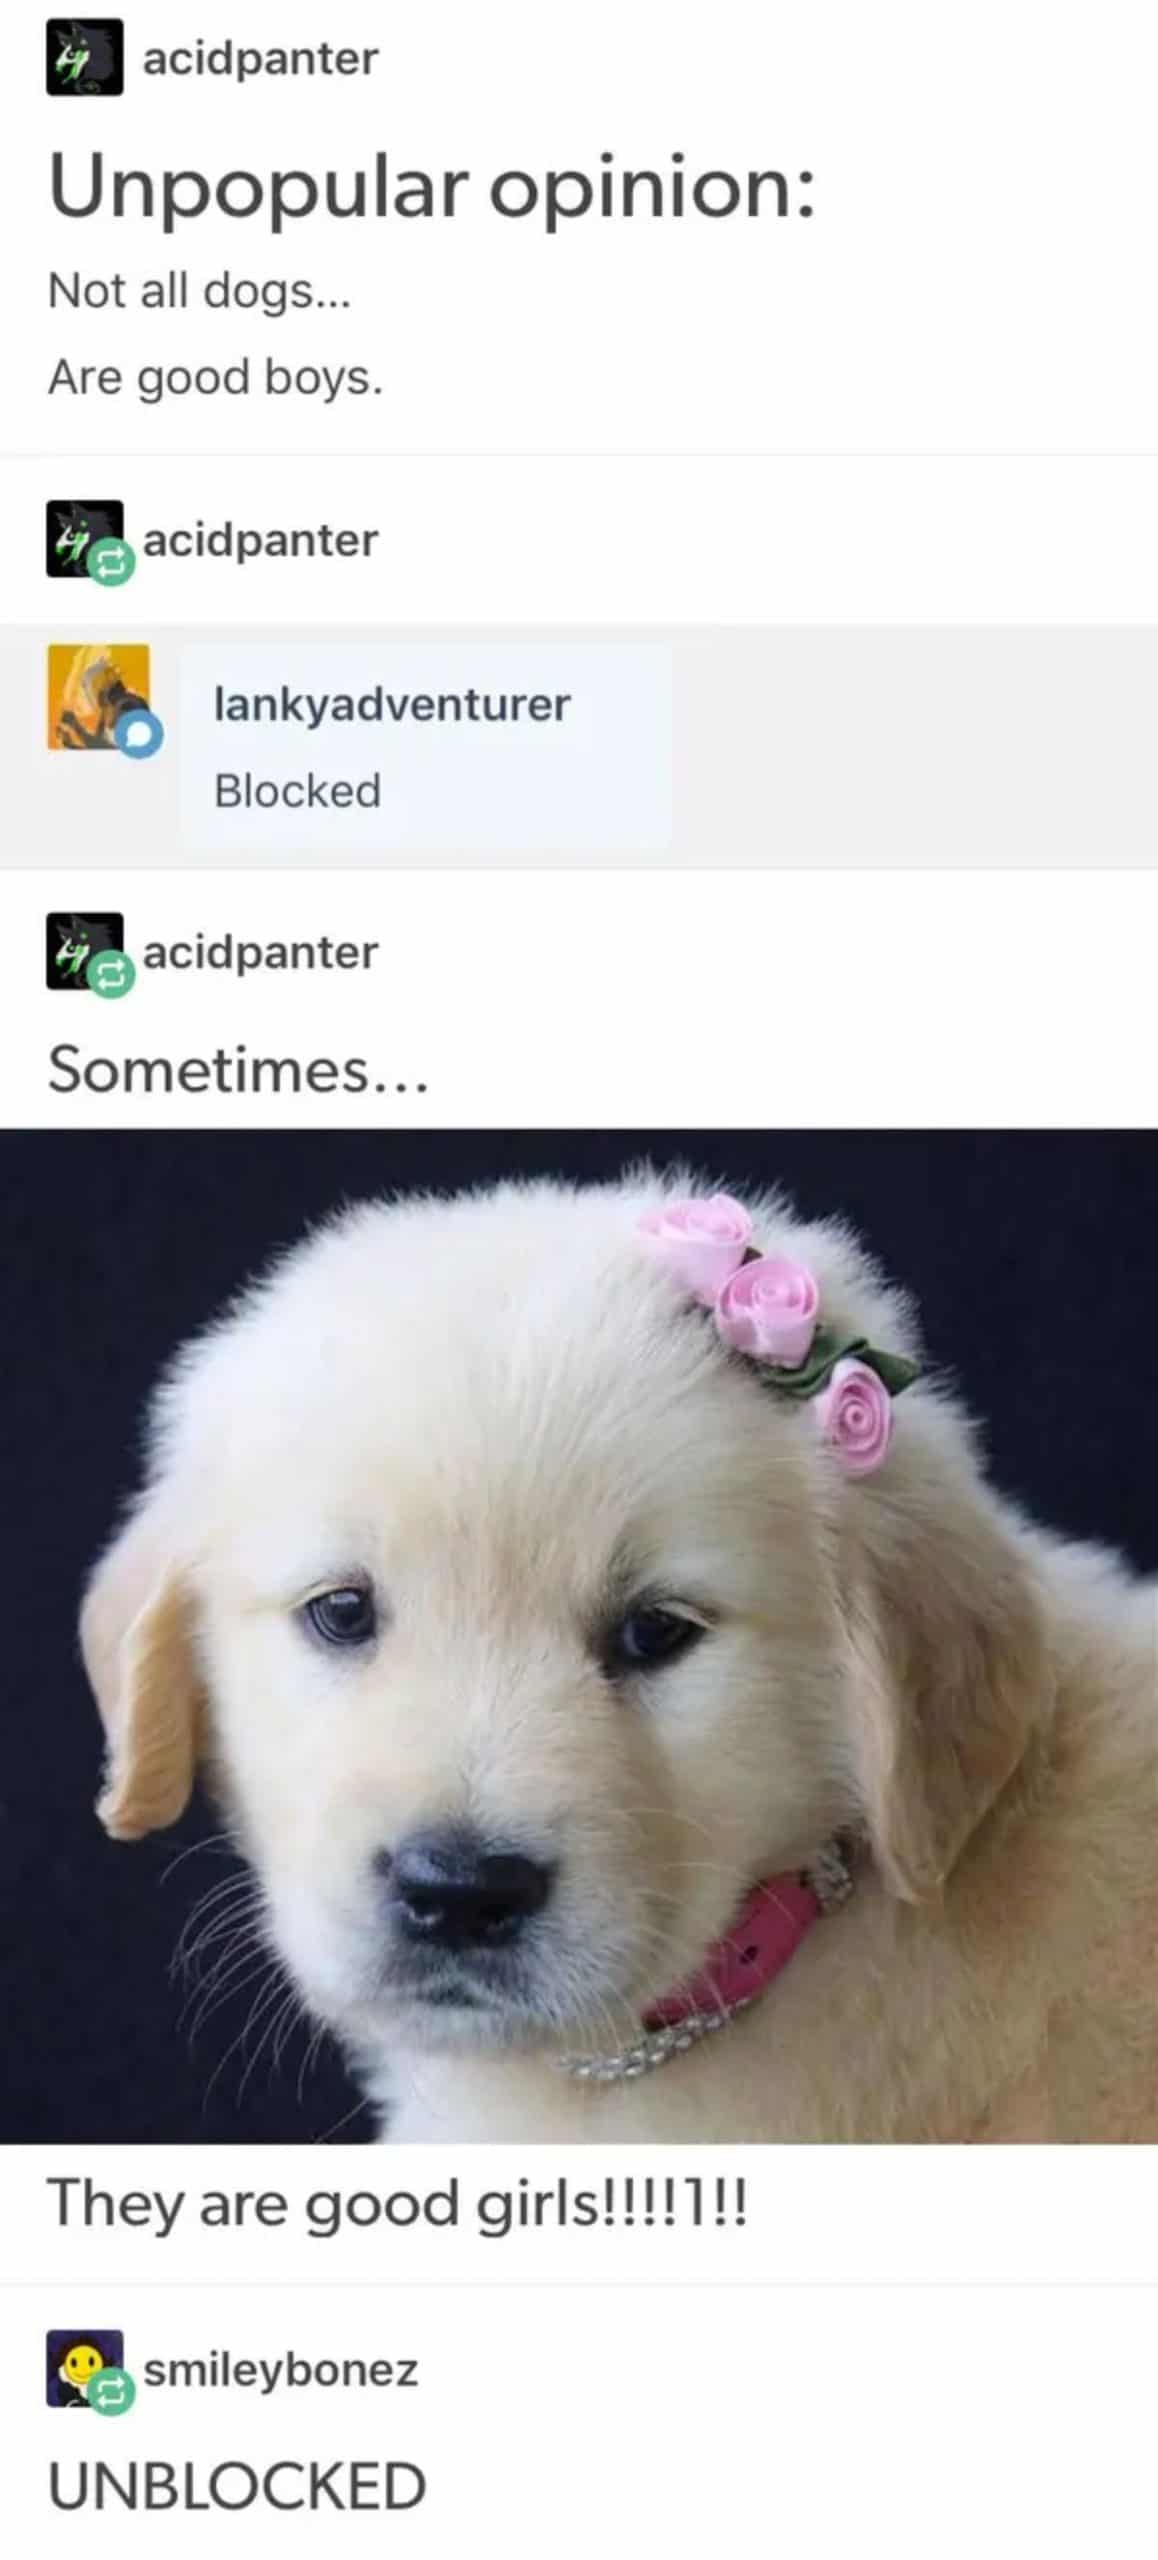 tumblr post of someone saying not all dogs are good boys and sometimes they are good girls with a golden retriever puppy with pink roses on the head